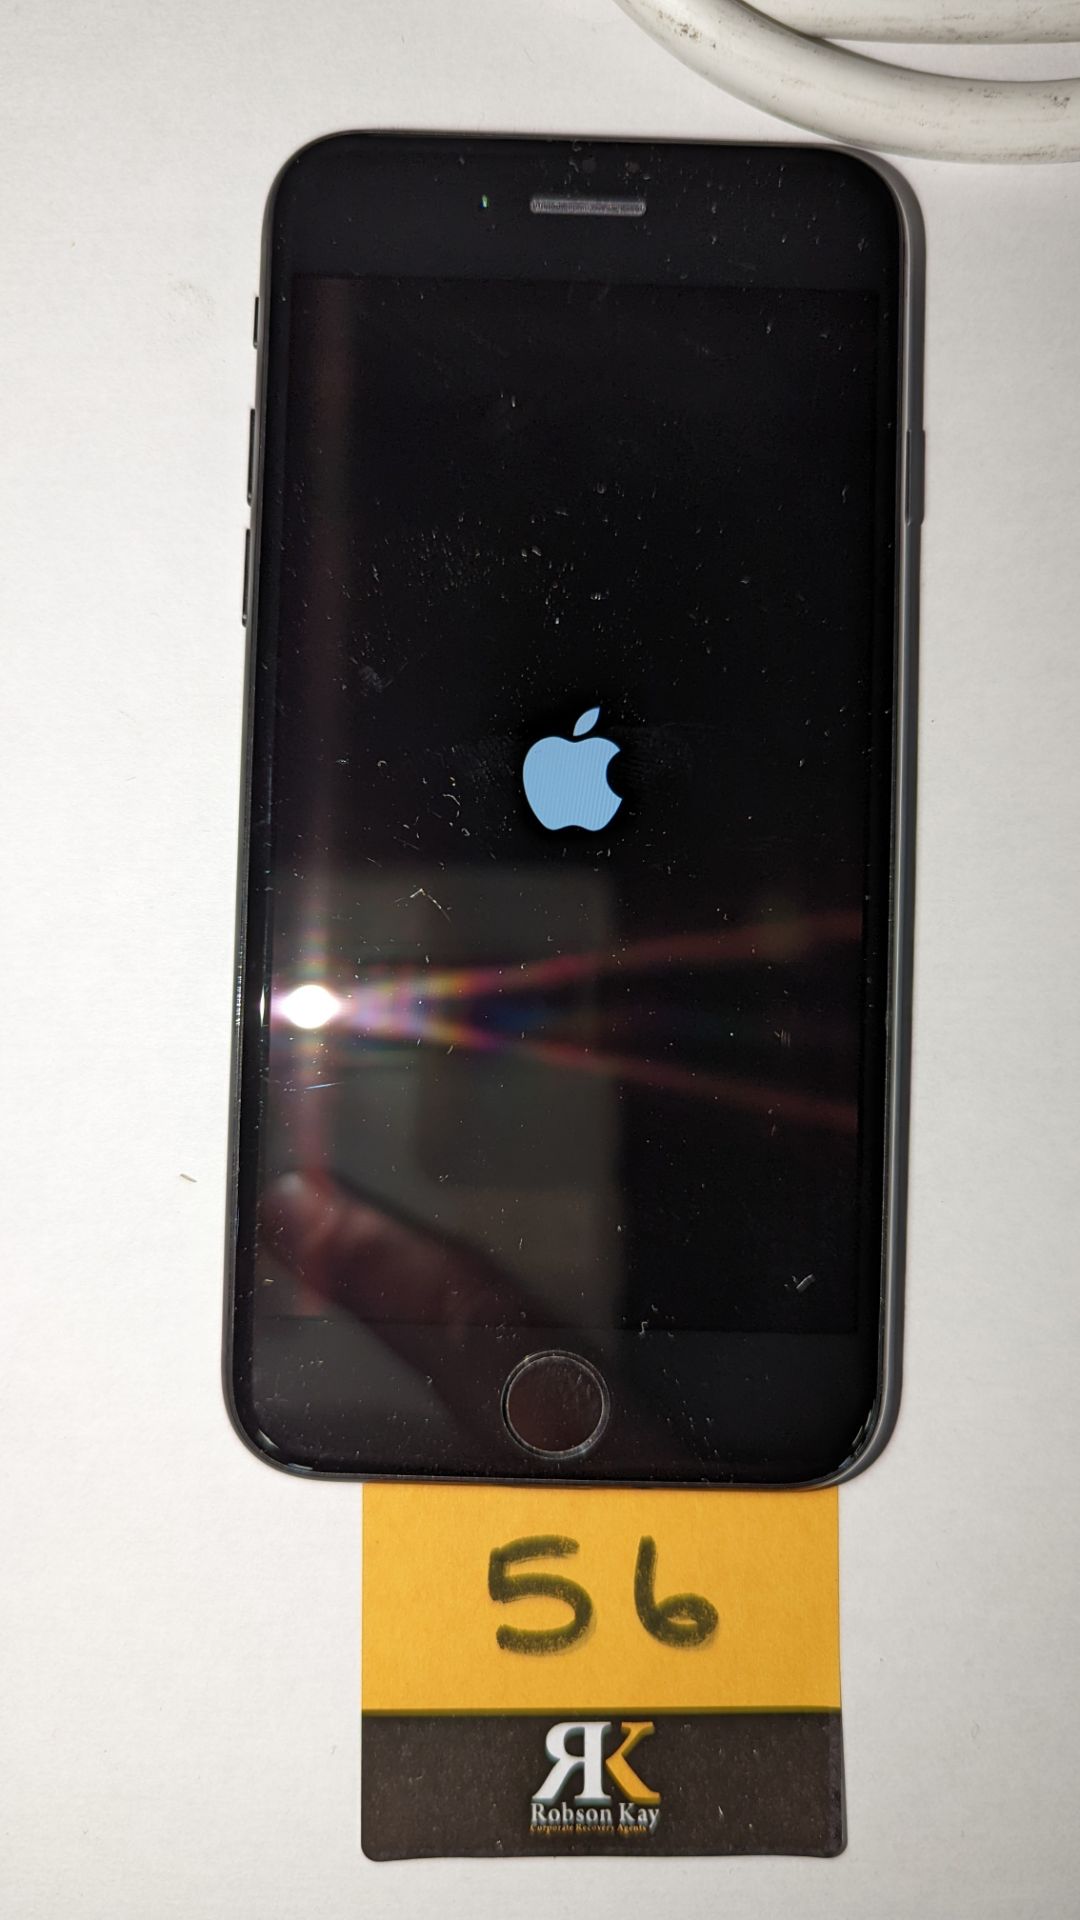 Apple iPhone 7, 32GB capacity, model A1778. No ancillaries or accessories - Image 10 of 10